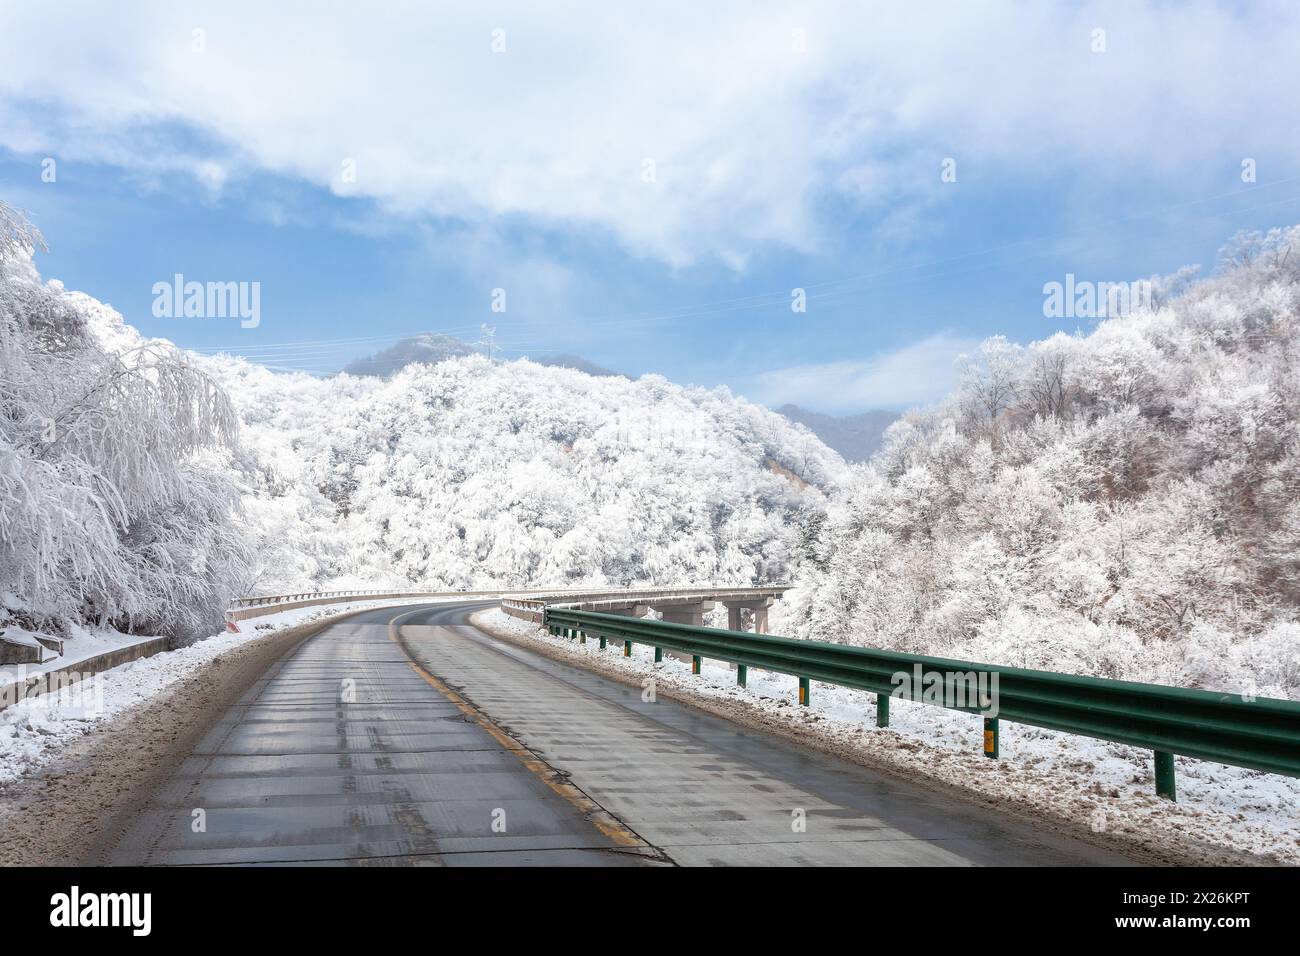 Shaanxi Qinling Snow Highway Banque D'Images